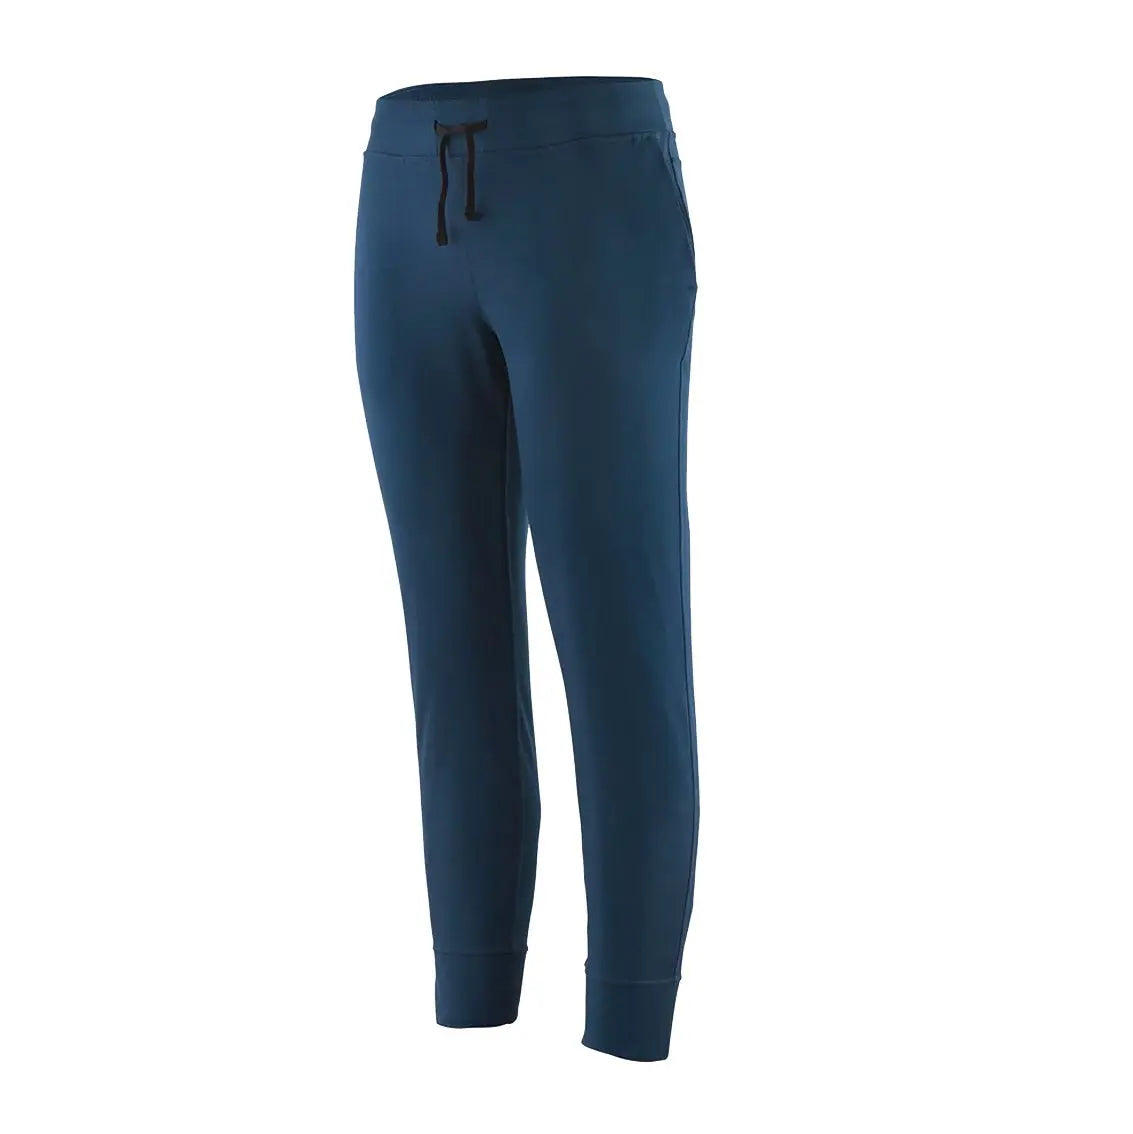 Womens Patagonia Pack Out Joggers - Dark Tidepool / Blue / Dye